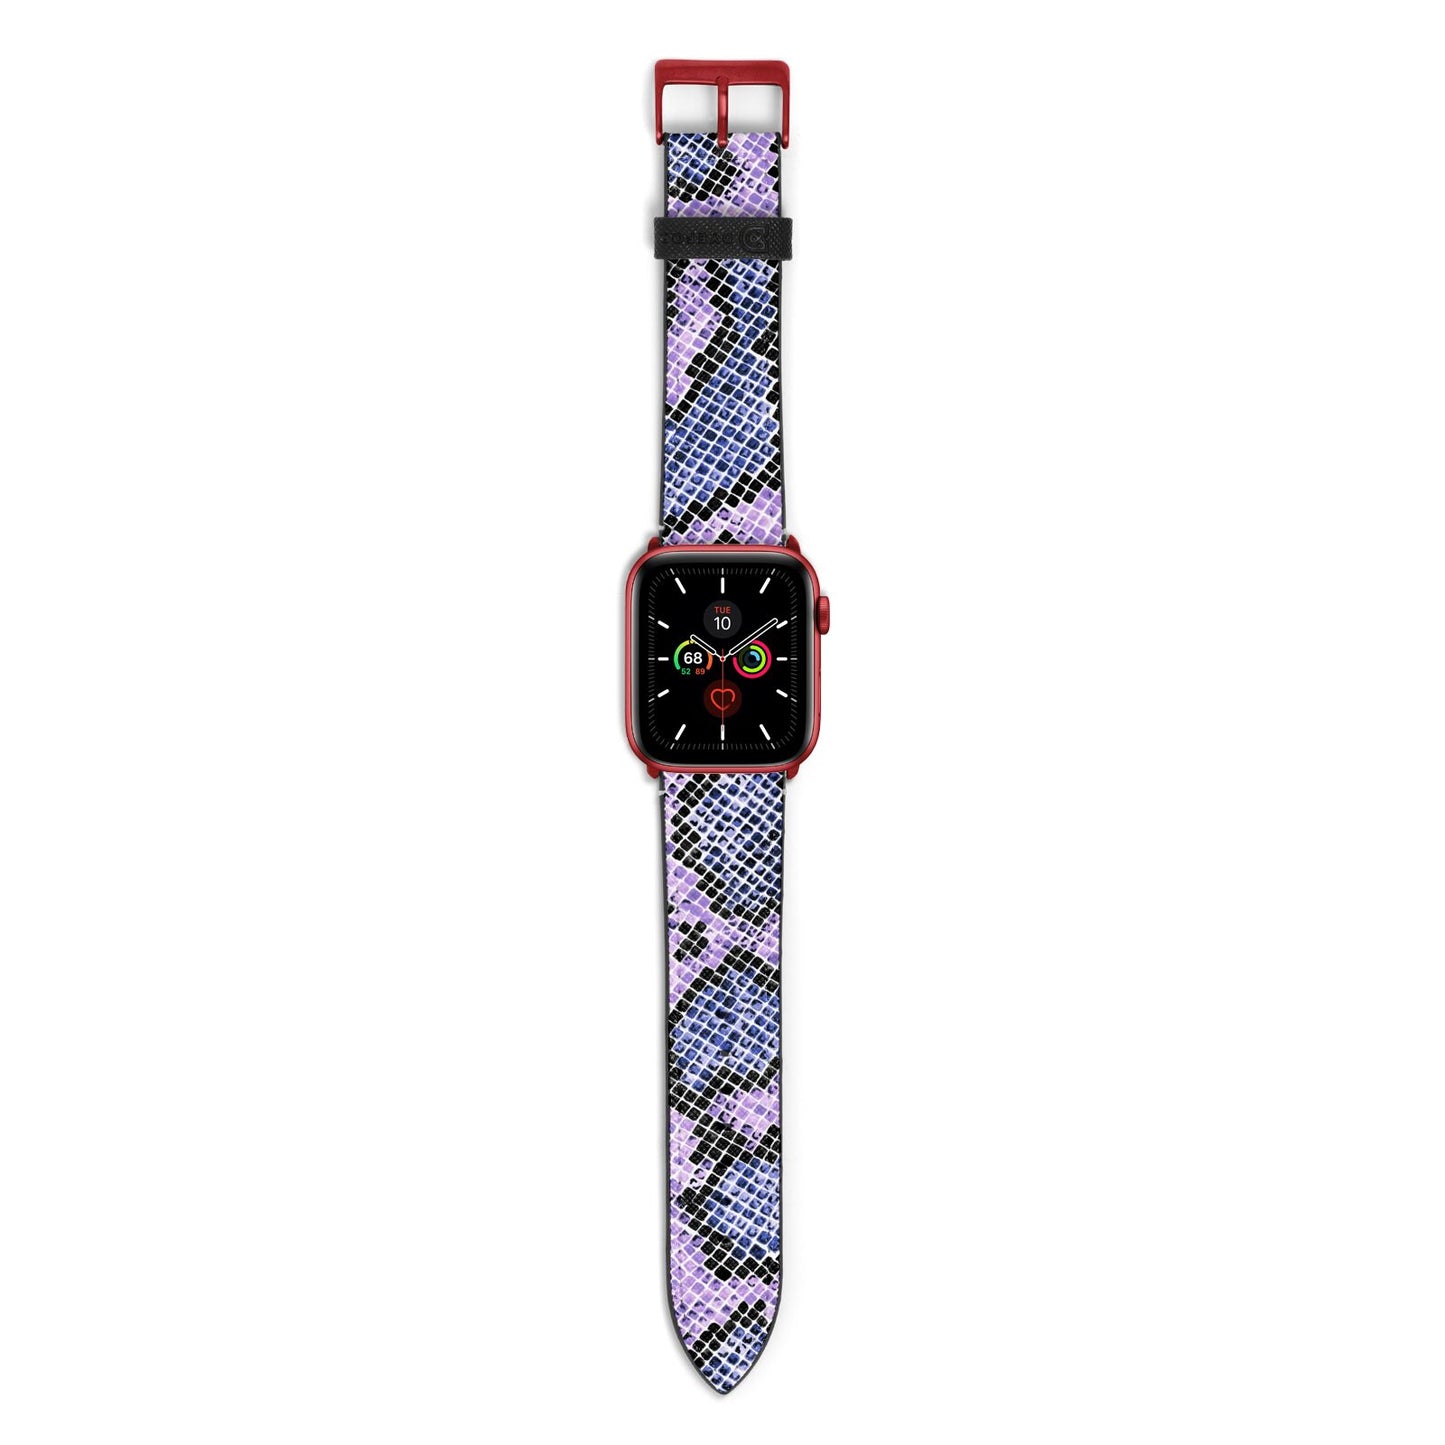 Purple And Blue Snakeskin Apple Watch Strap with Red Hardware